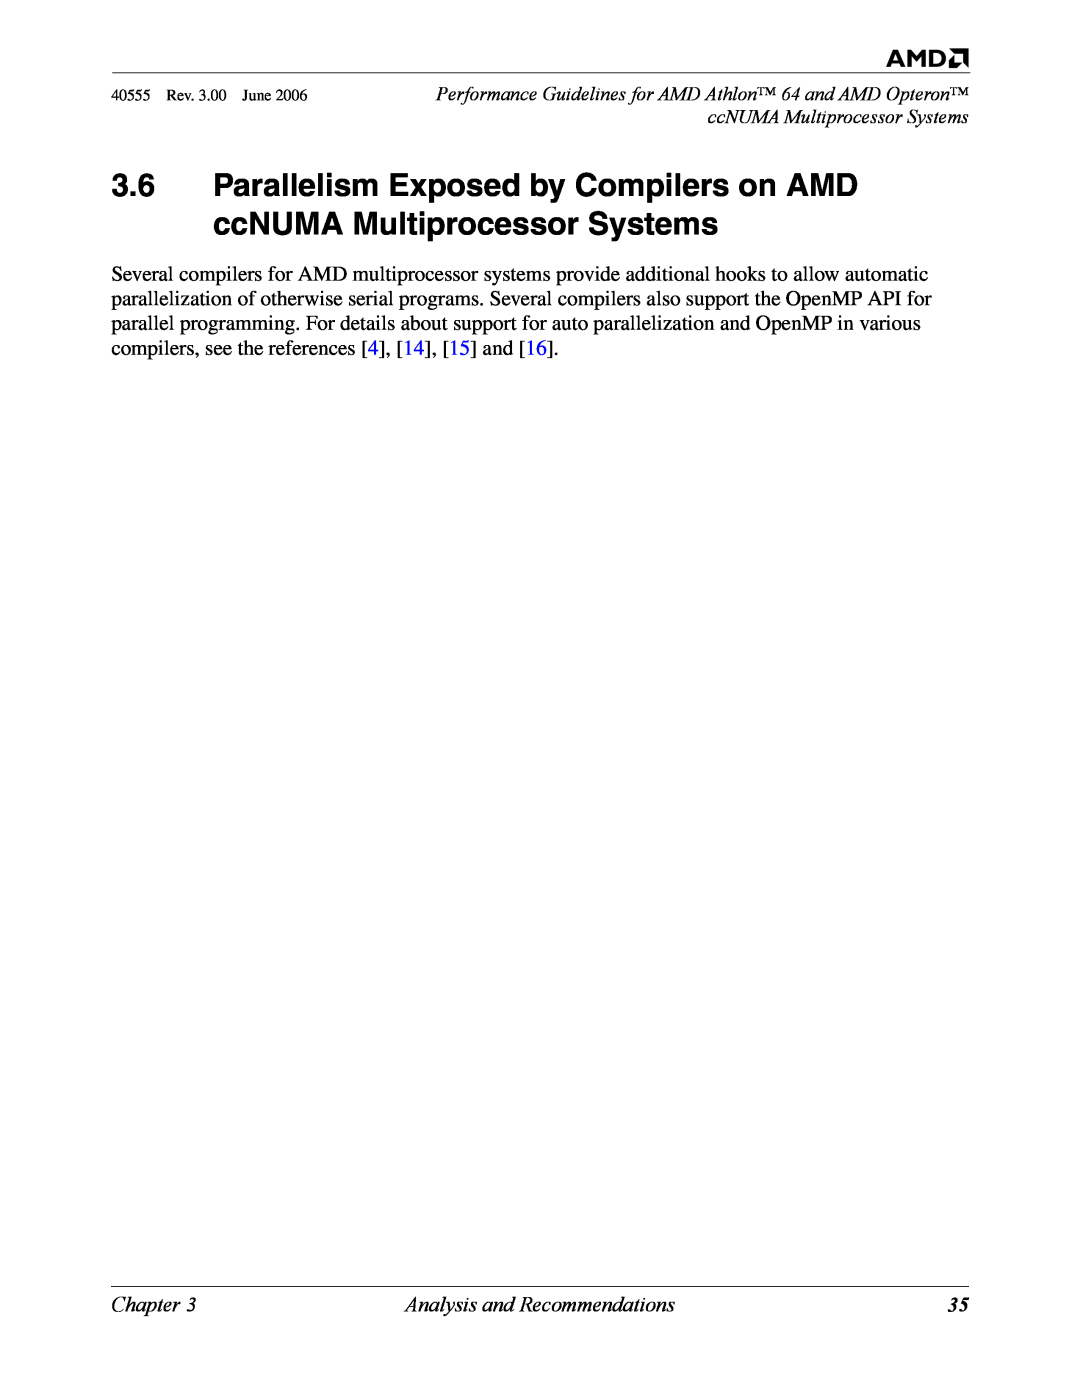 AMD 64 manual Chapter, Analysis and Recommendations 